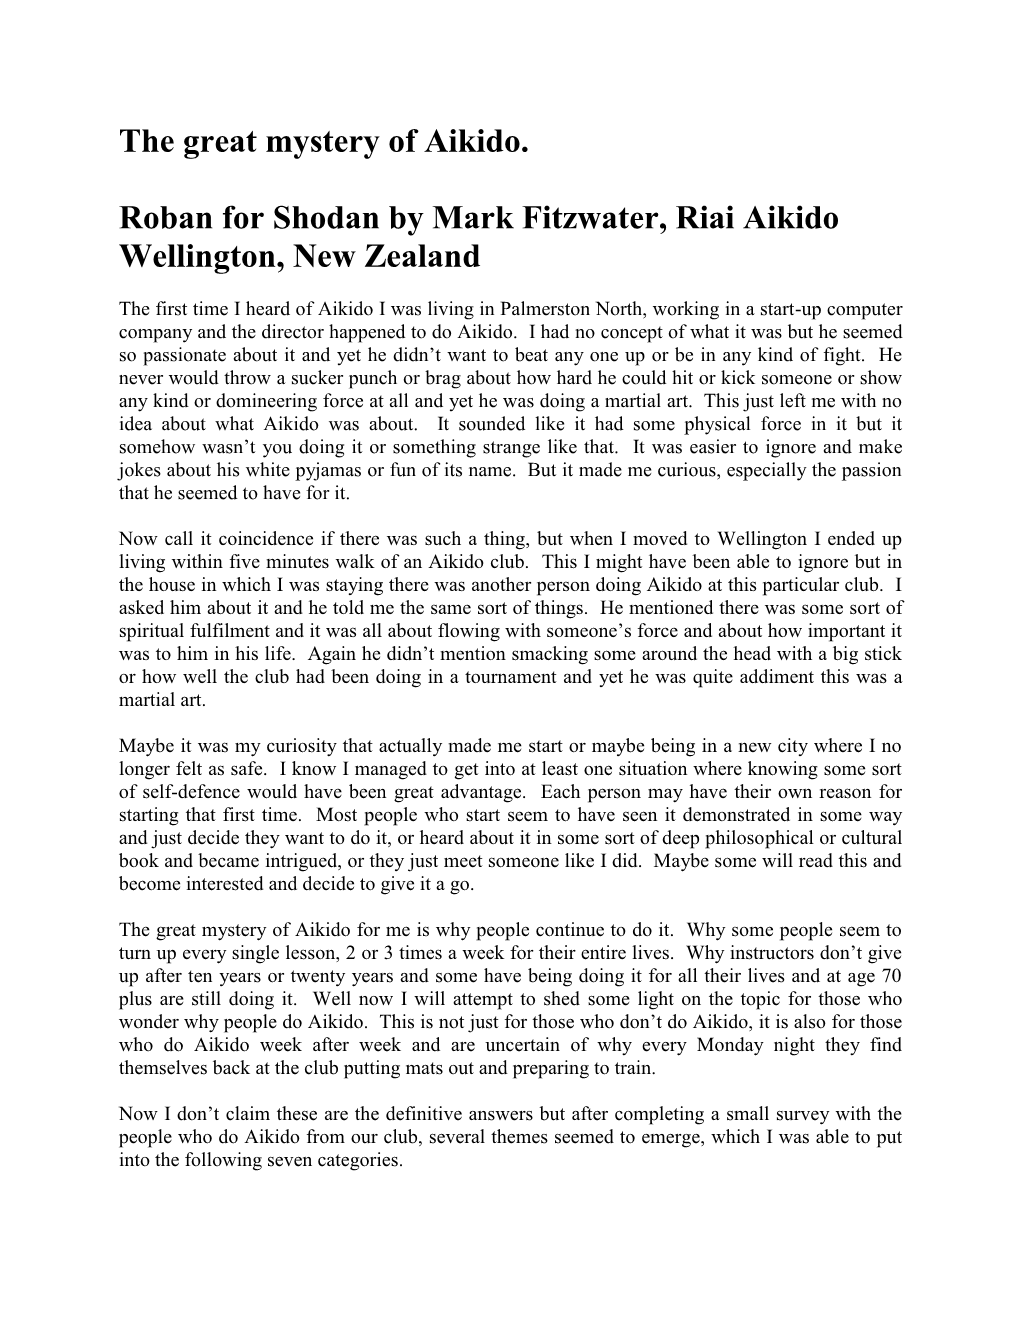 The Great Mystery of Aikido. Roban for Shodan by Mark Fitzwater, Riai